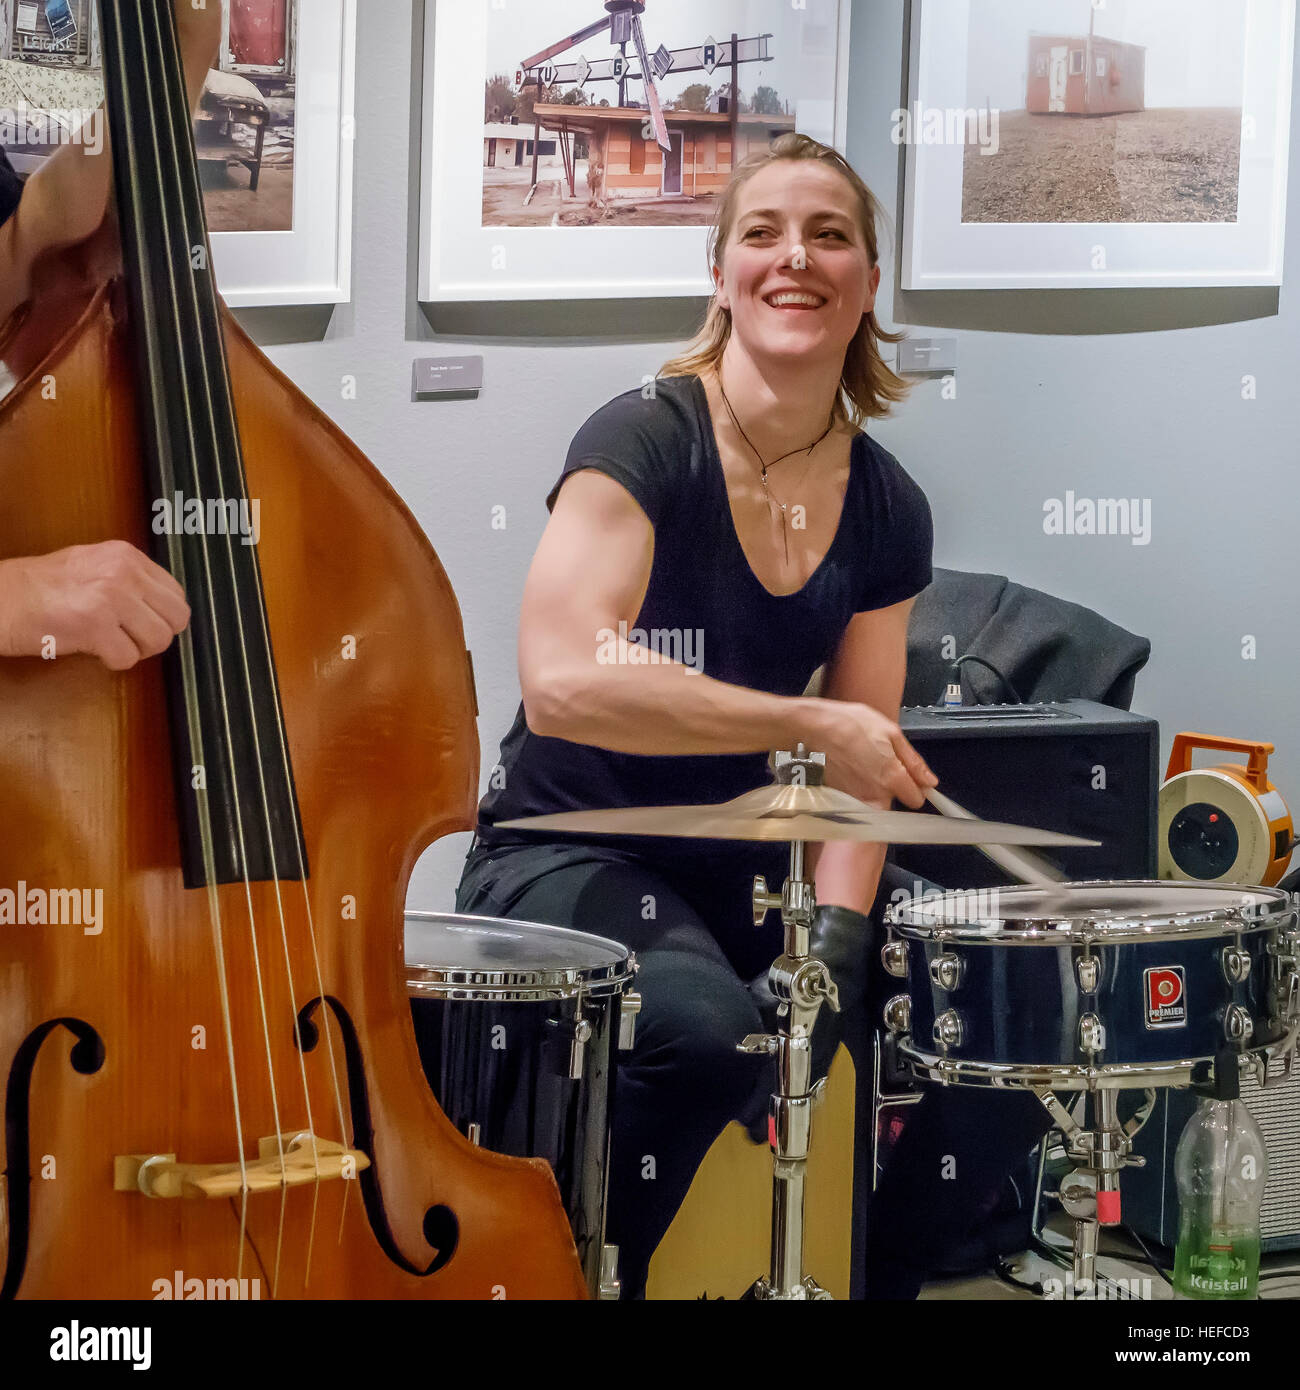 Female drummer with a cello player, Reykjavik Library, Reykjavik, Iceland Stock Photo